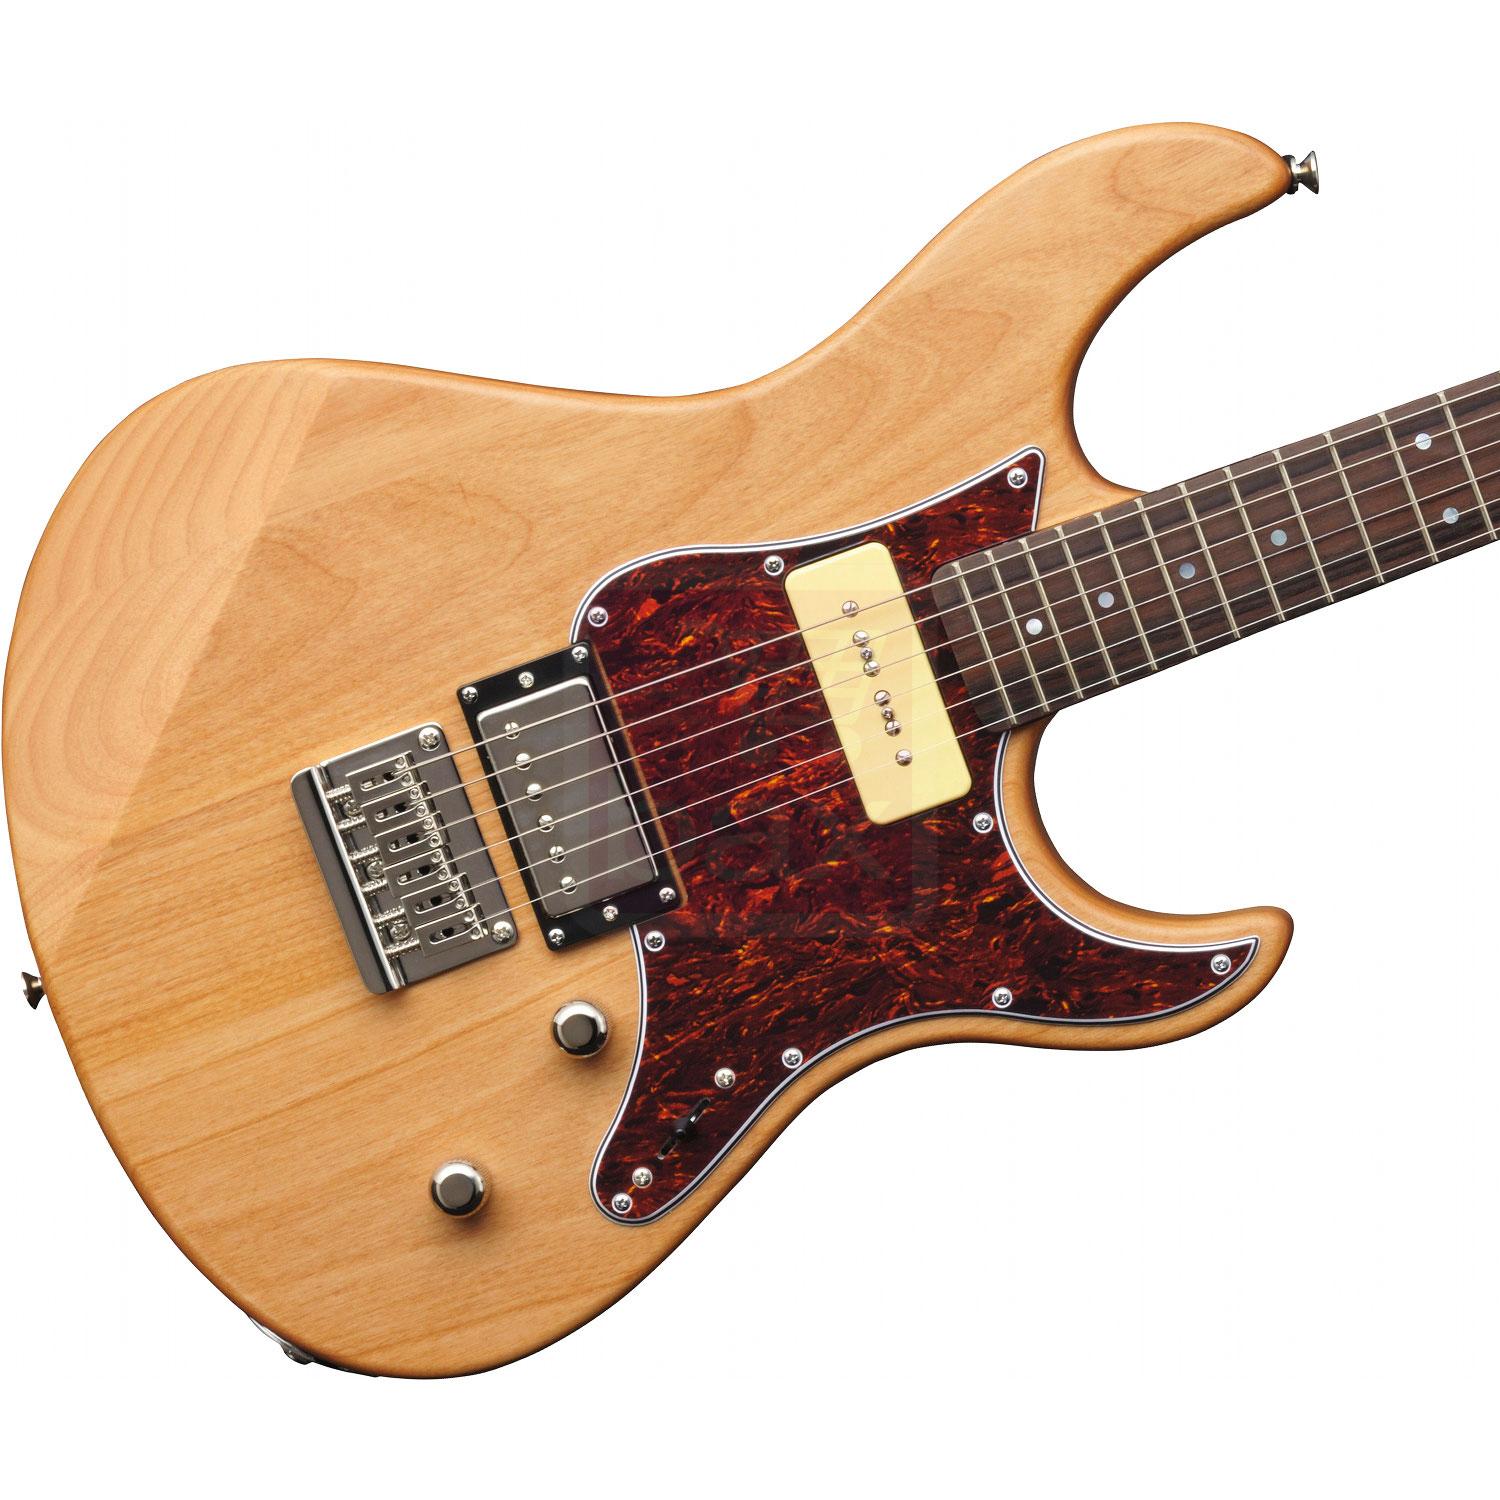 Yamaha Pacifica Pac311h - Natural Satin - E-Gitarre in Str-Form - Variation 2